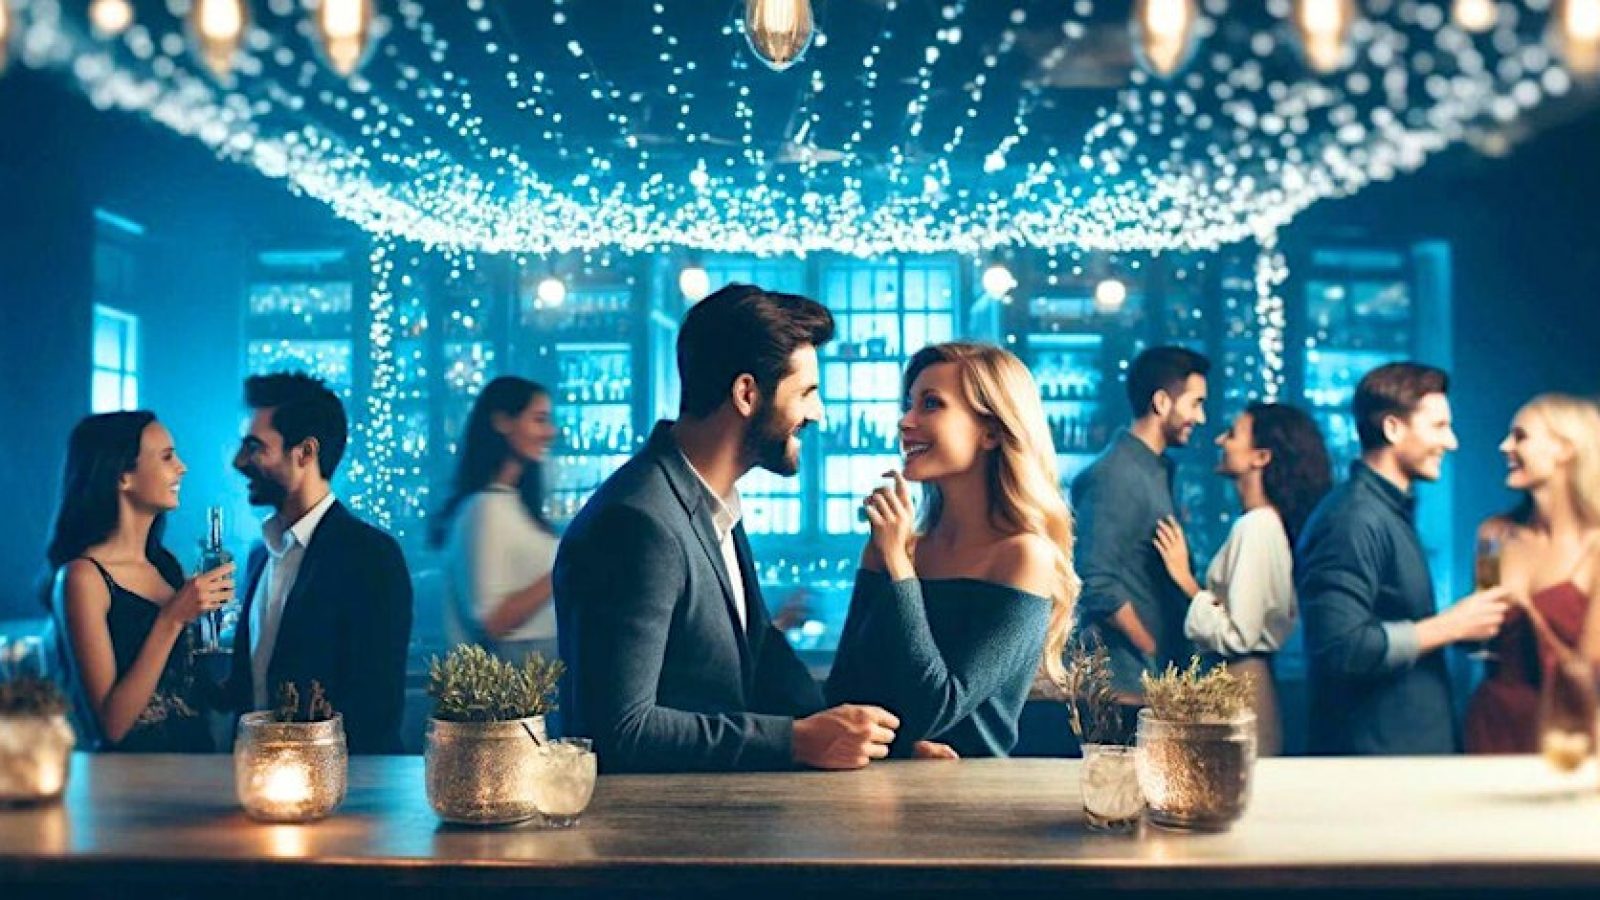 over 30s speed dating event at a bar in Brisbane, QLD